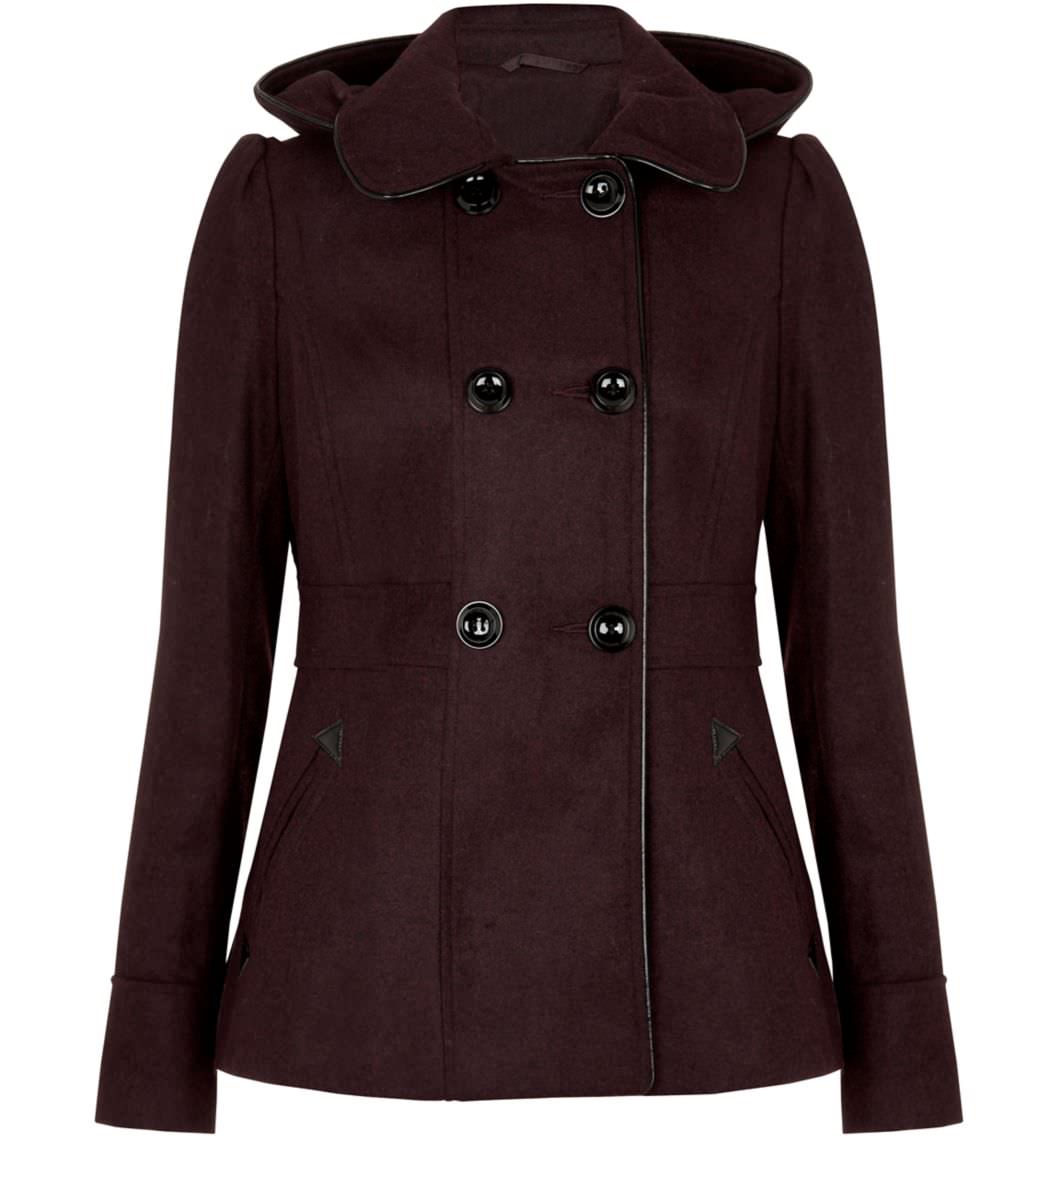 Burgundy Double Breasted Hooded Coat - £21.00 New Look